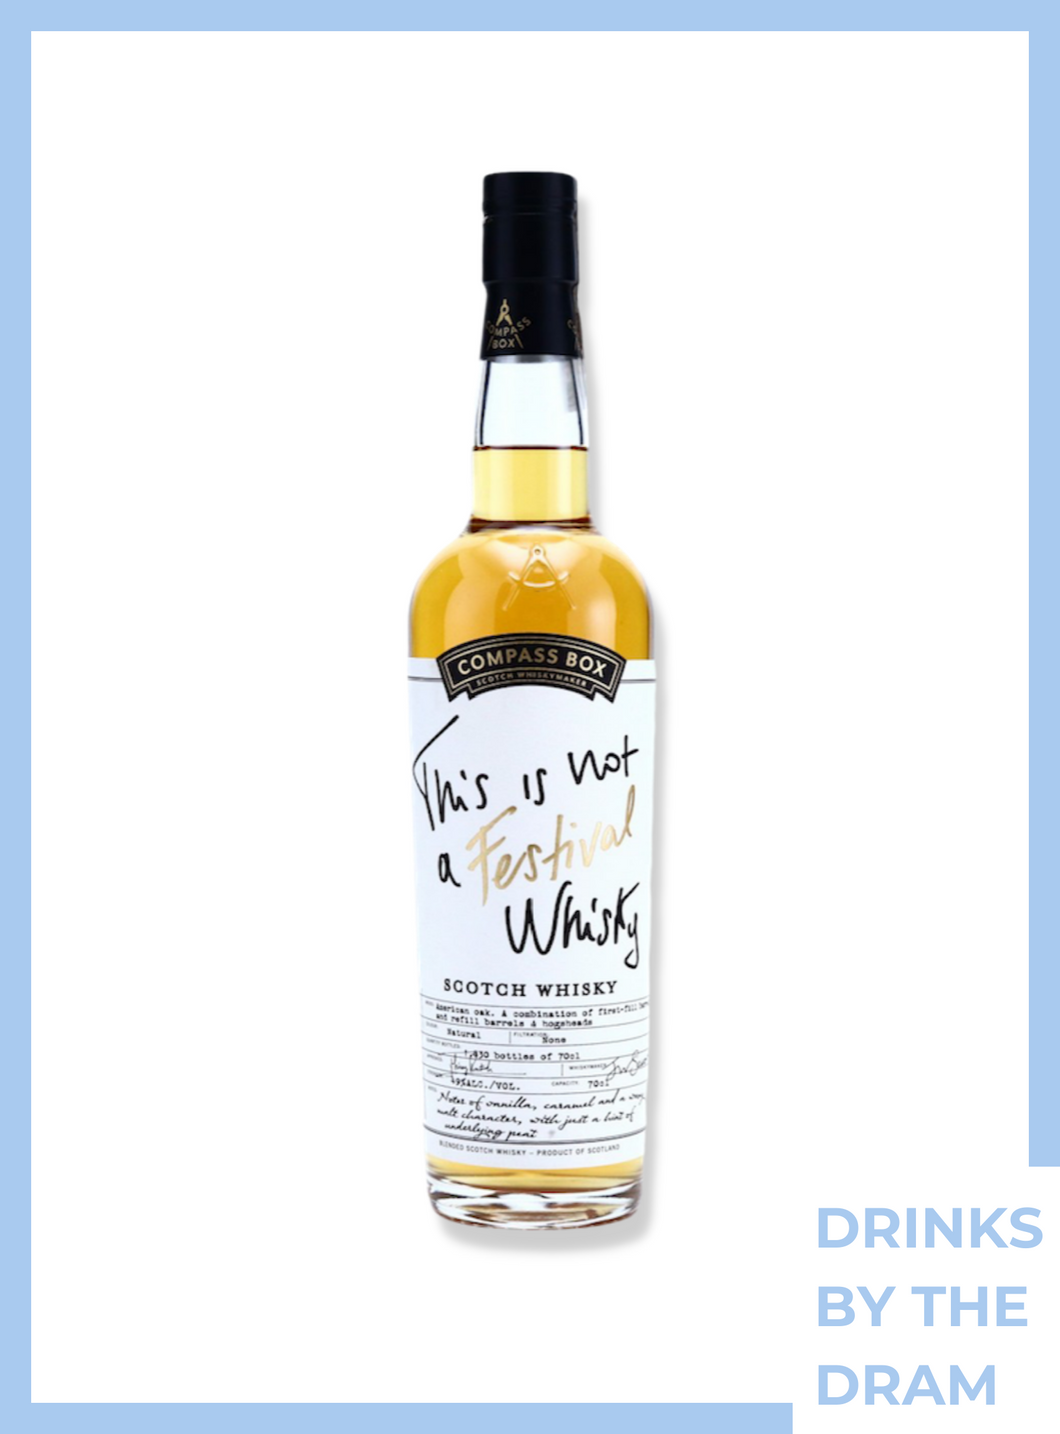 By the Dram (30 ml): This Is Not A Festival Whisky